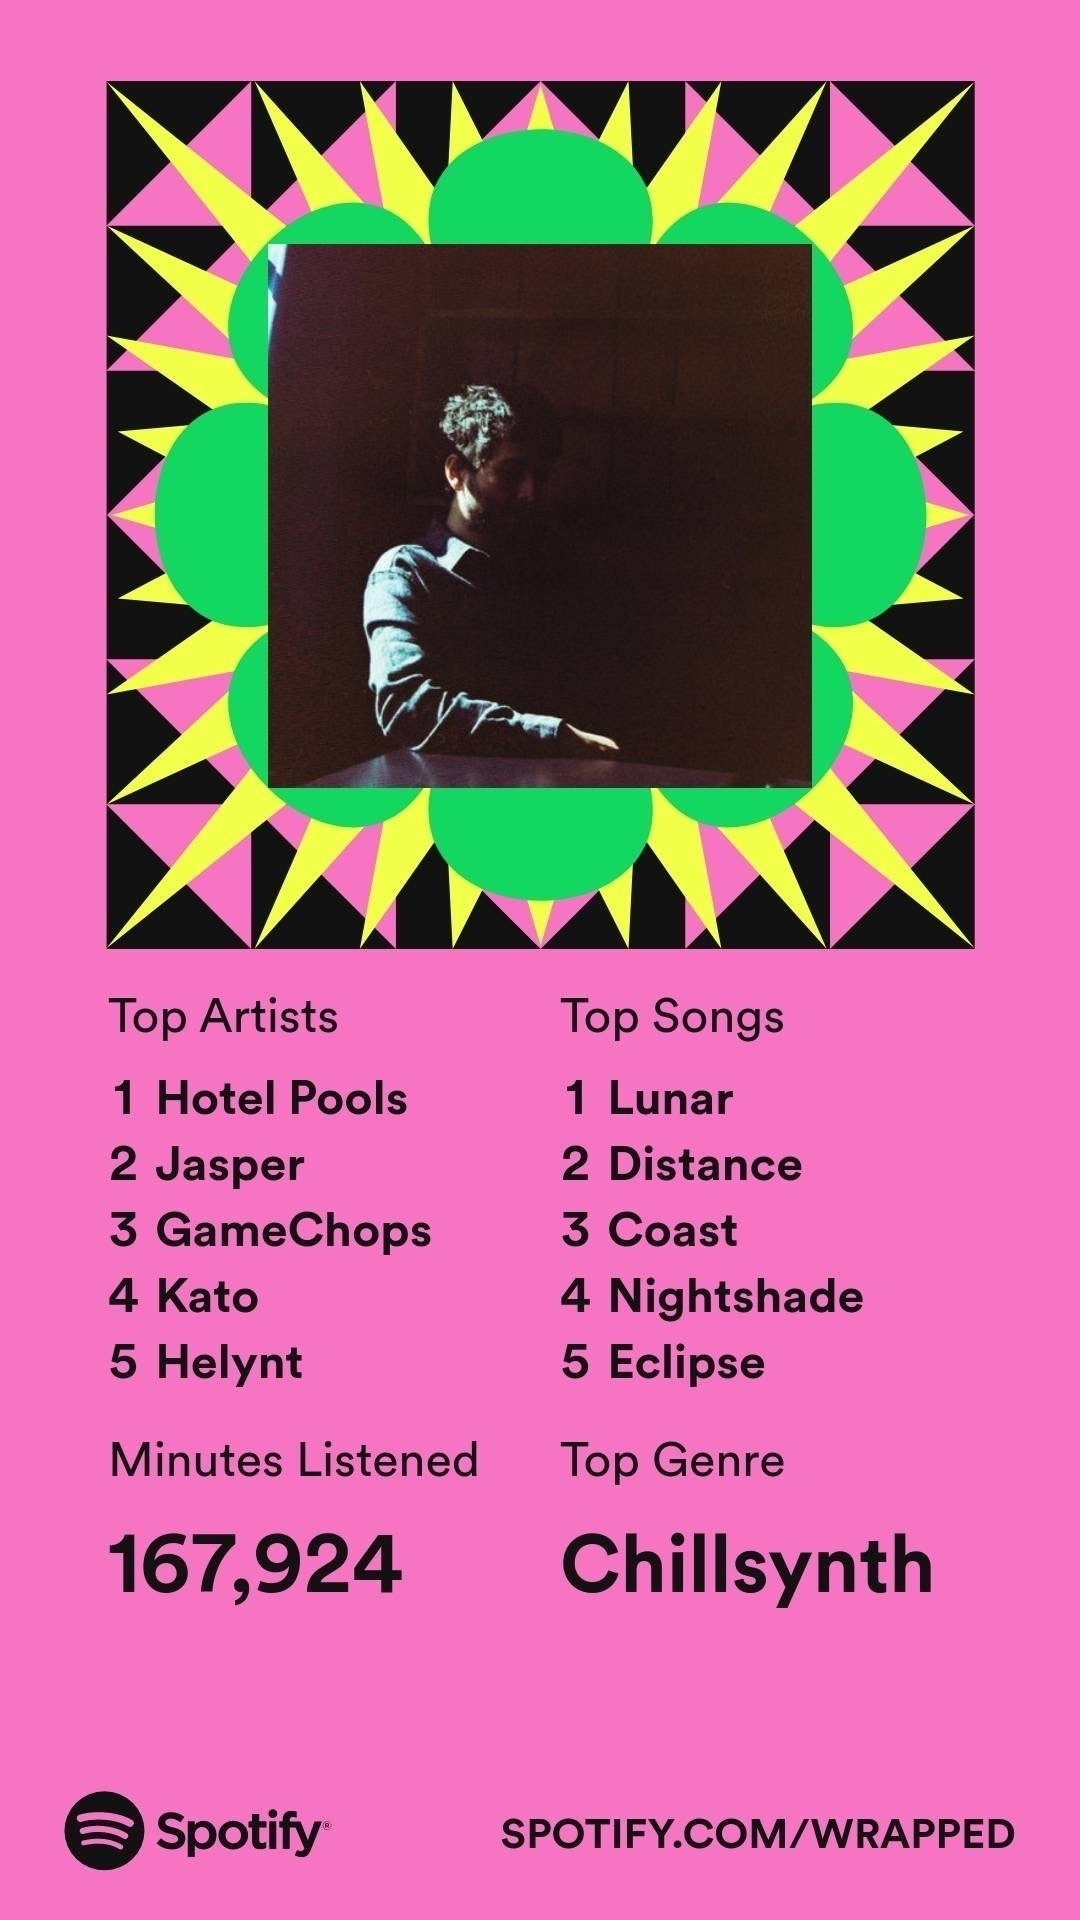 Stylized card with pink background, a photo of the music artist Hotel Pools, and my Spotify Wrapped data that is in this post